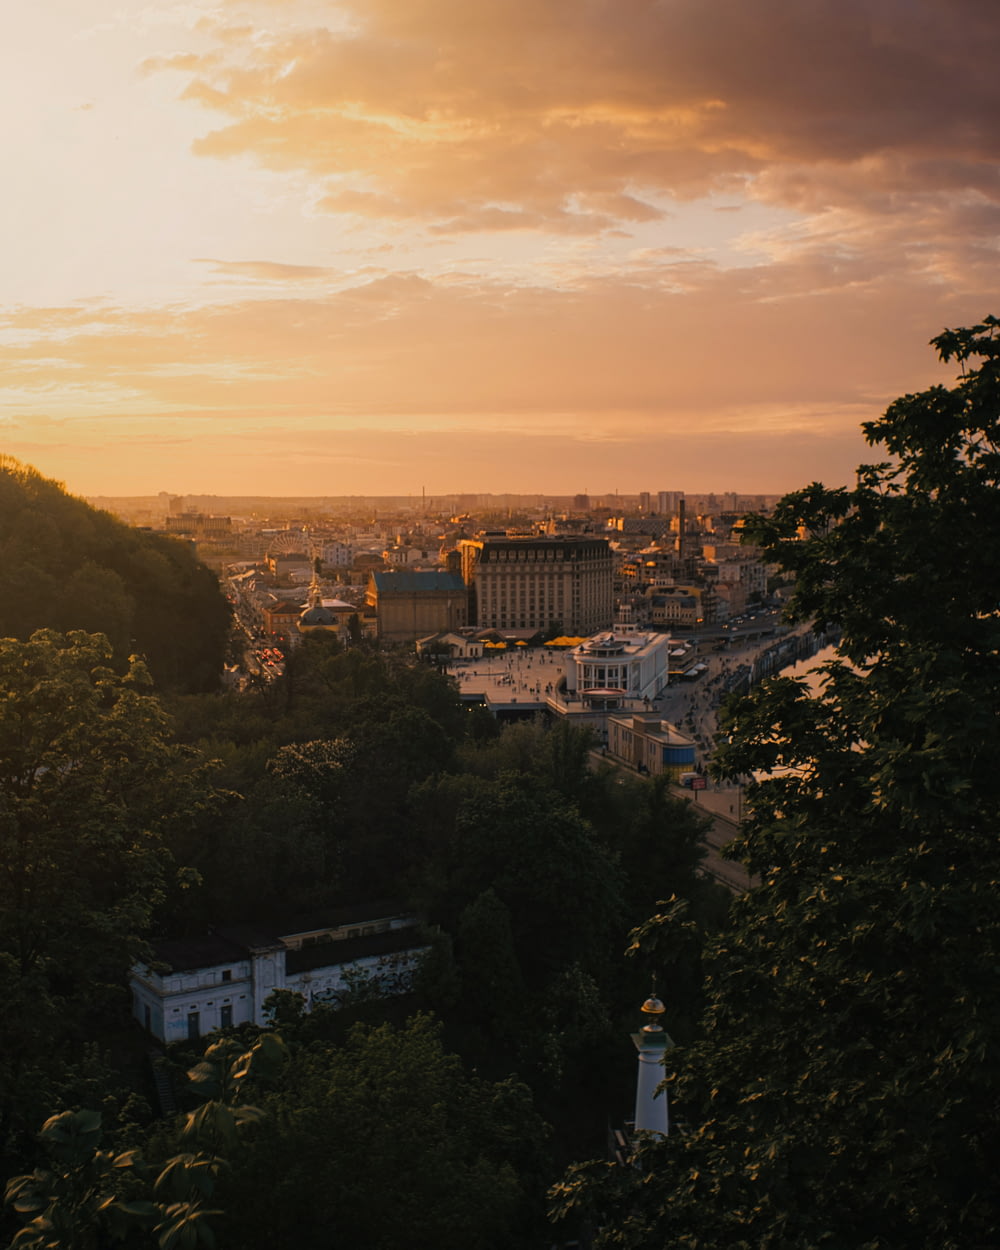 a view of a city from a hill at sunset